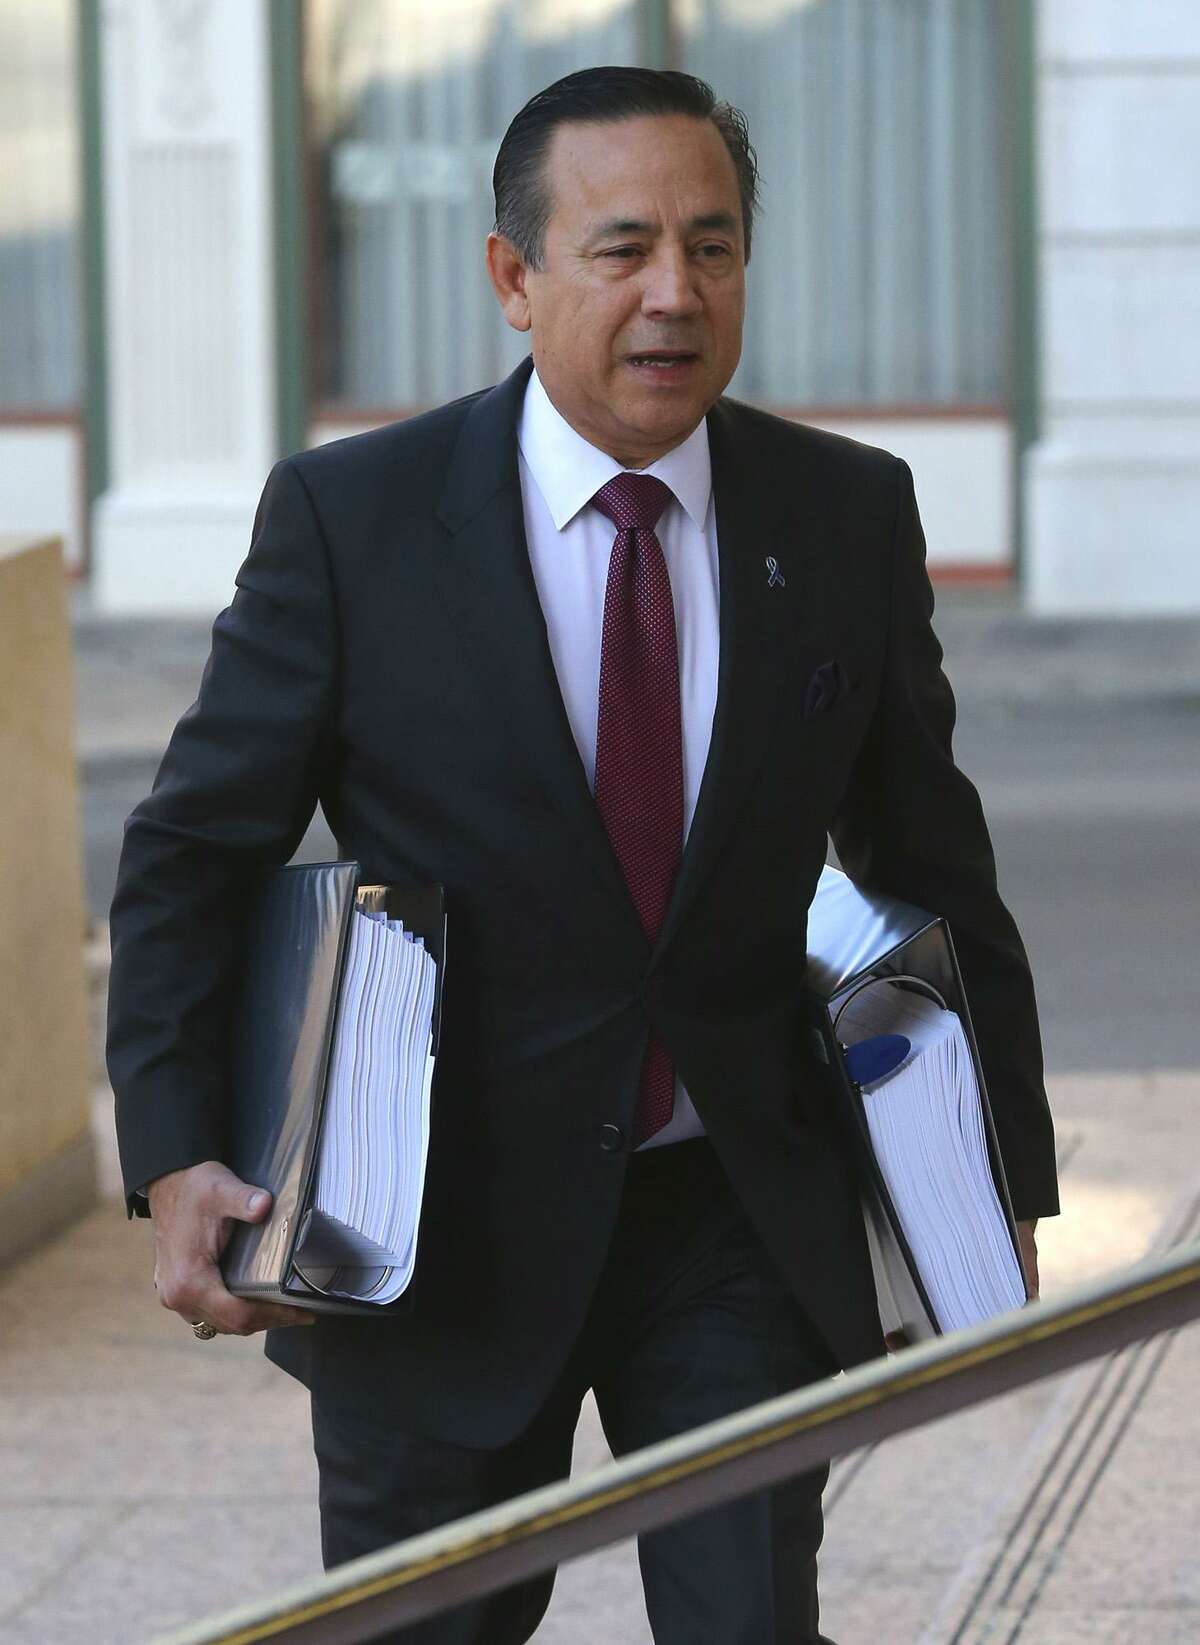 State Sen. Carlos Uresti was subpoenaed to testify Tuesday in a bankruptcy court dispute over about $2.5 million a Chapter 7 trustee is seeking to recover from a Dallas surgeon who invested with FourWinds Logistics. Uresti had been legal counsel for FourWinds for part of 2014 and early 2015.